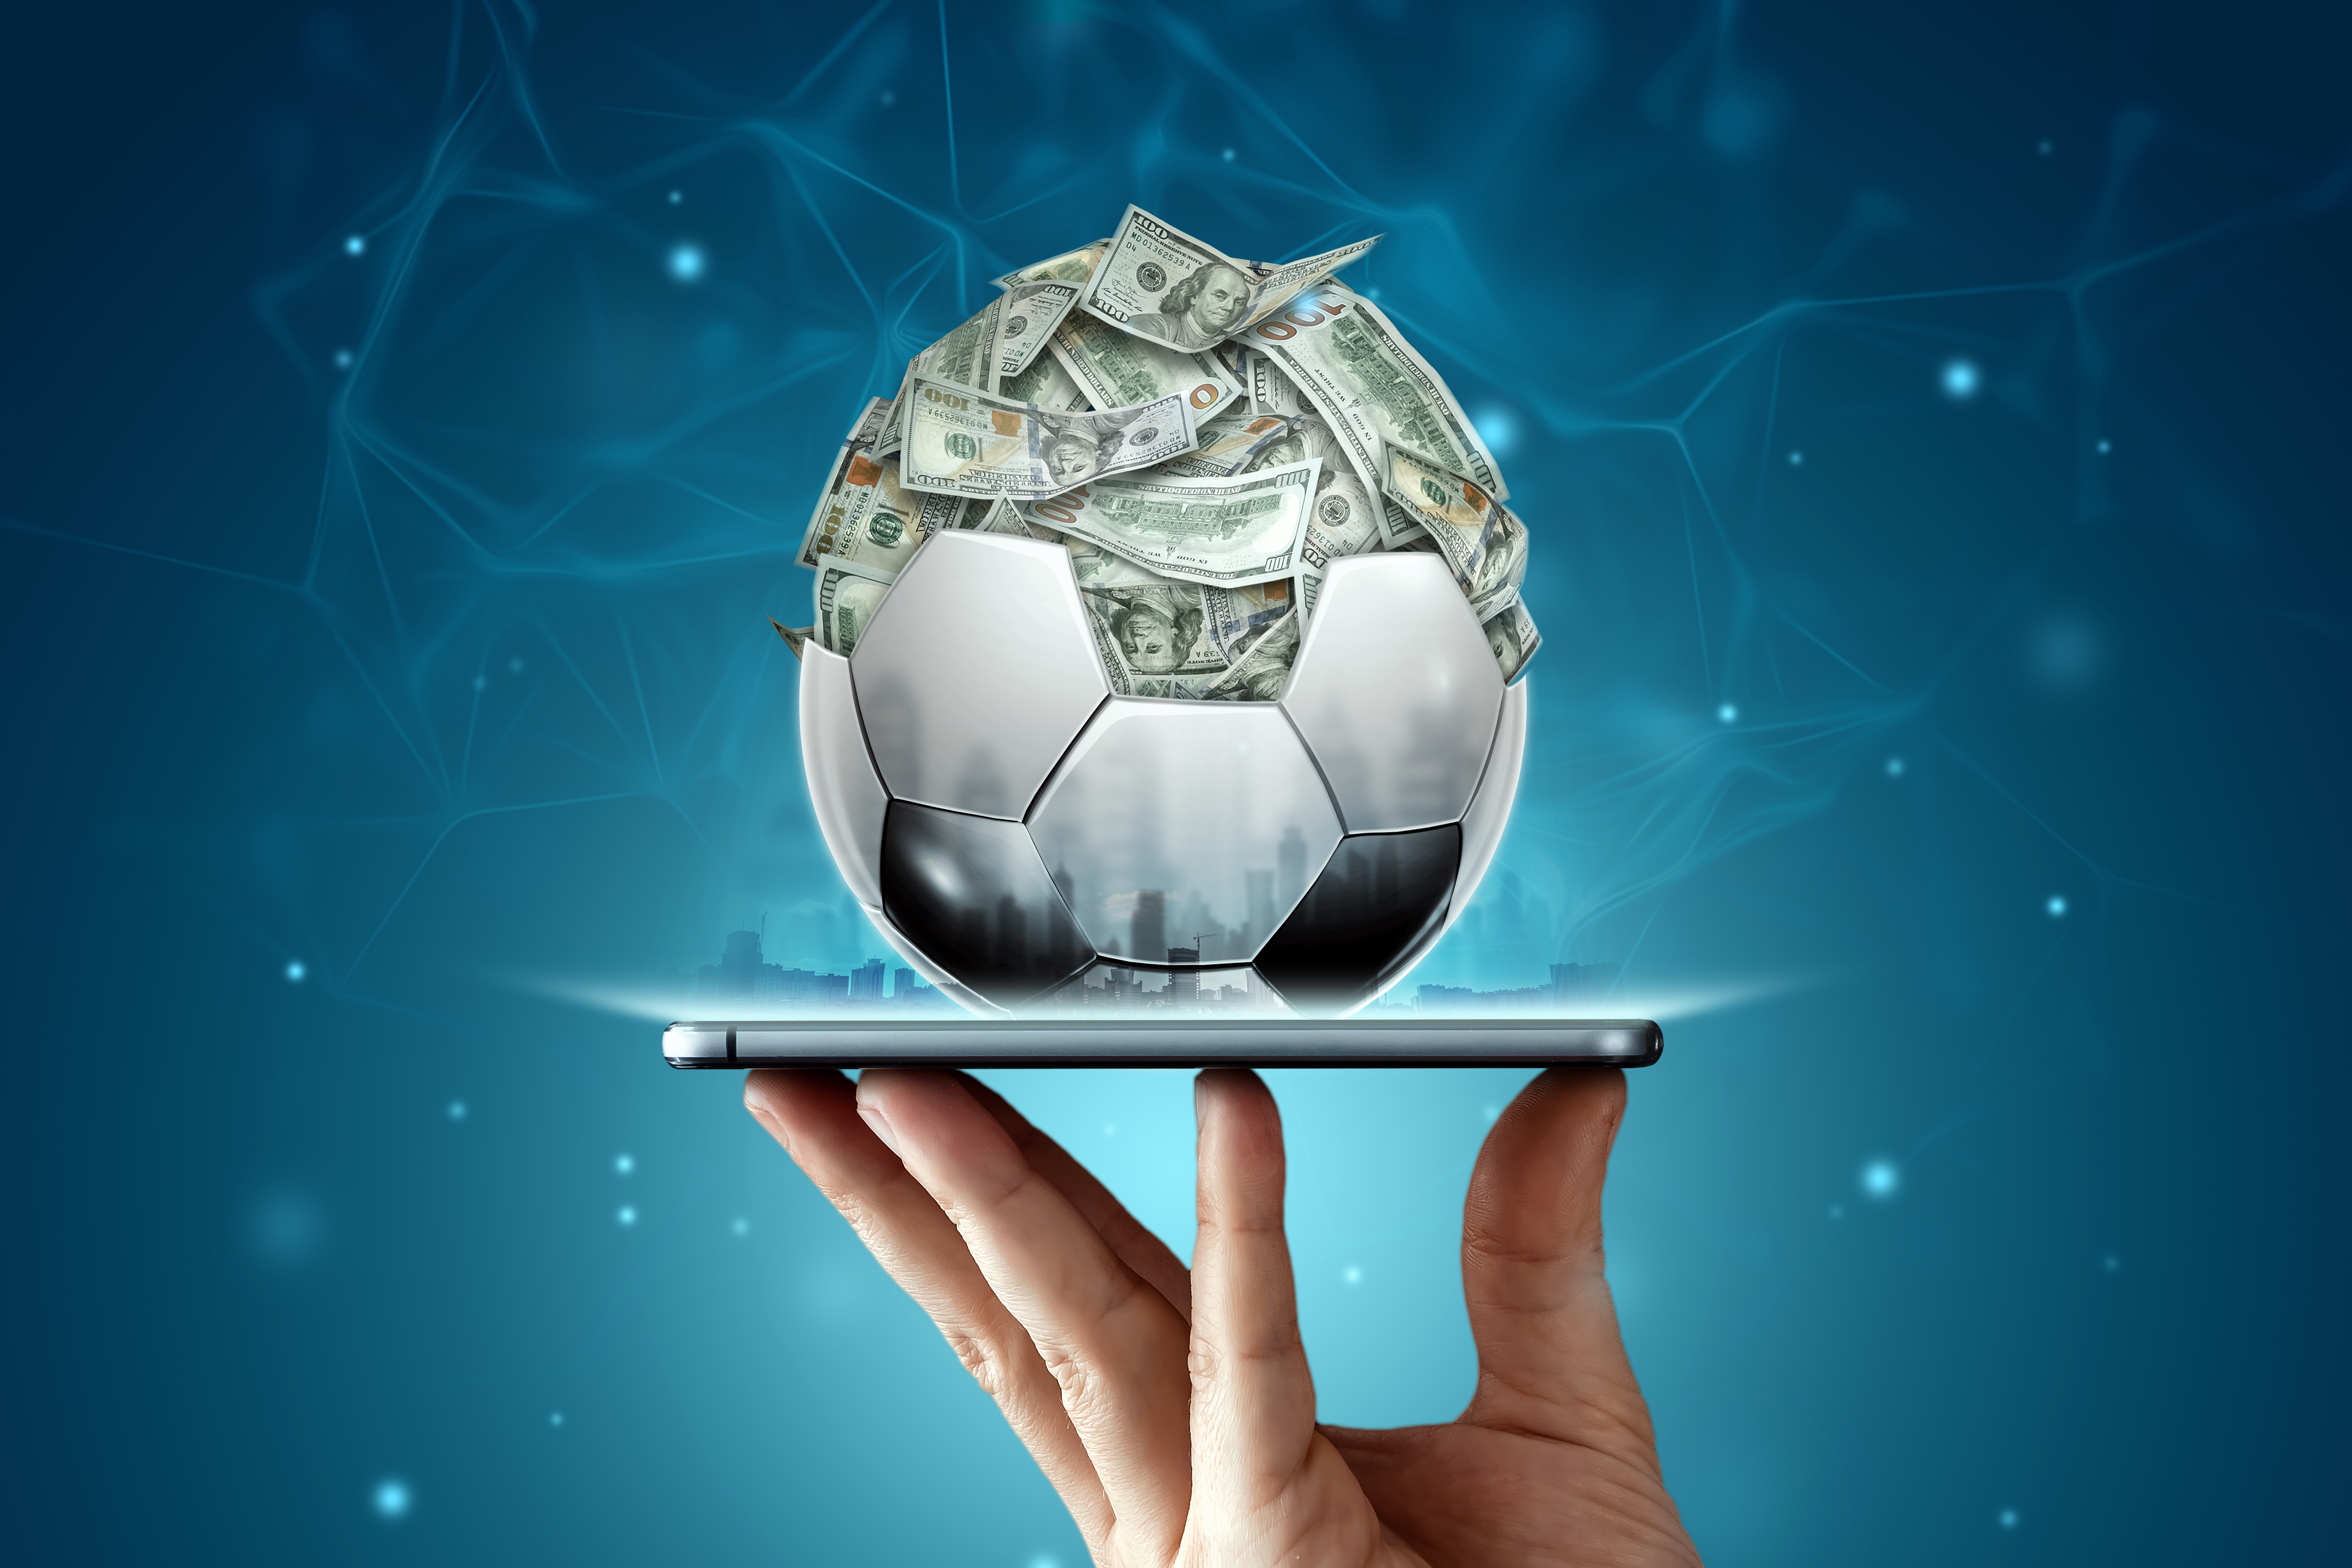 dollars-are-inside-soccer-ball-ball-is-filled-with-money-smartphone-sports-betting-soccer-betting-gambling-bookmaker-big-win